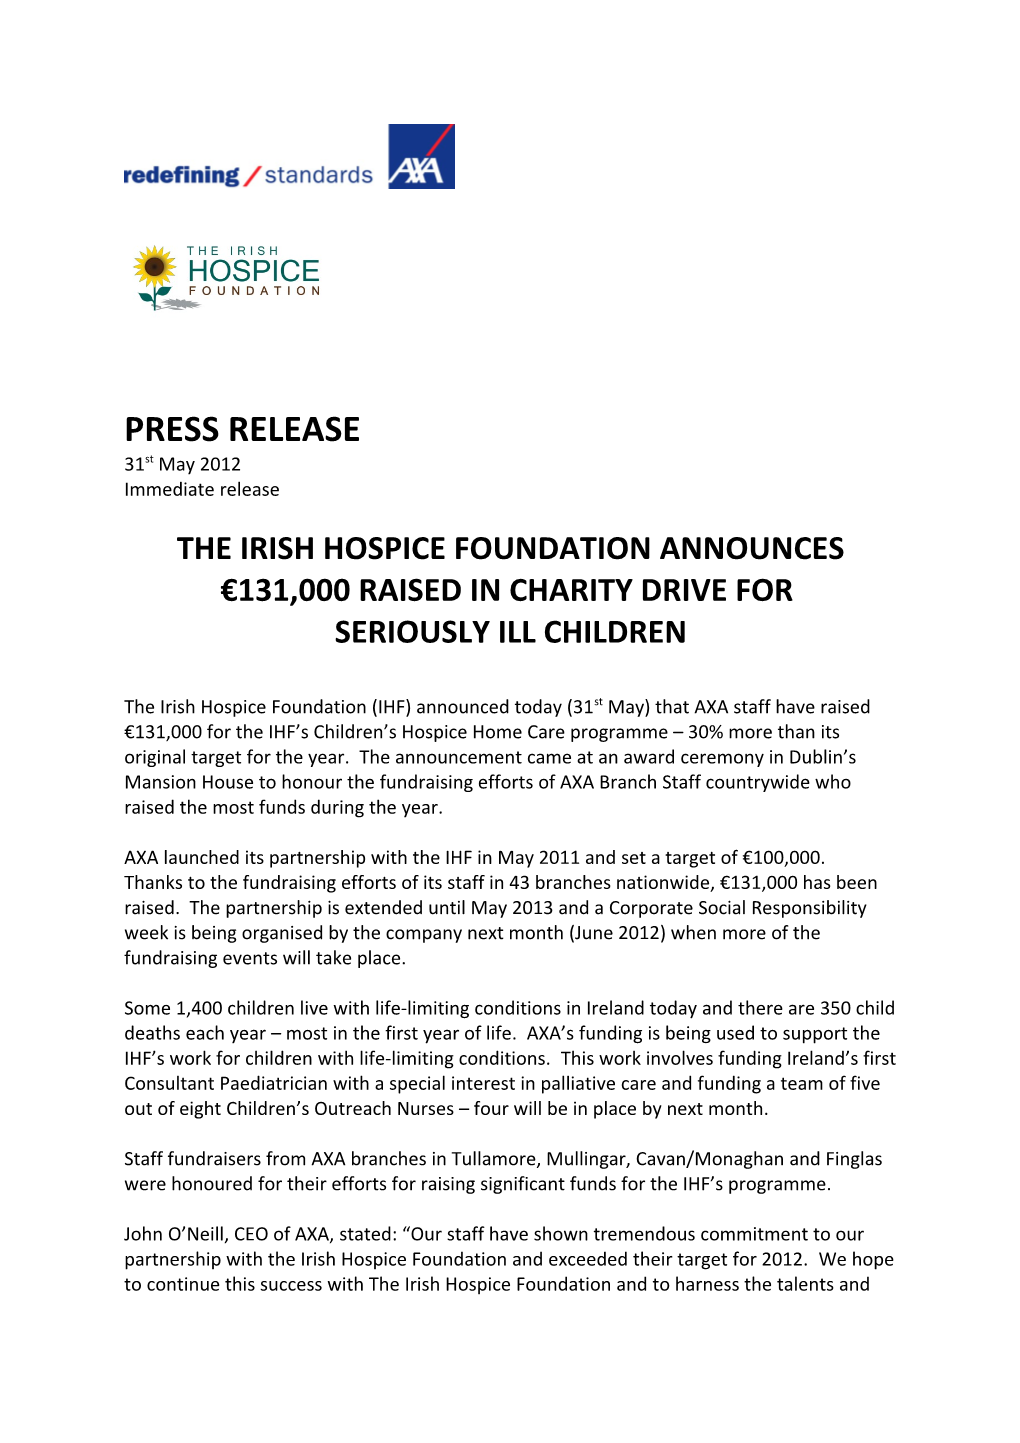 The Irish Hospice Foundation Announces 131,000 Raised in Charity Drive For